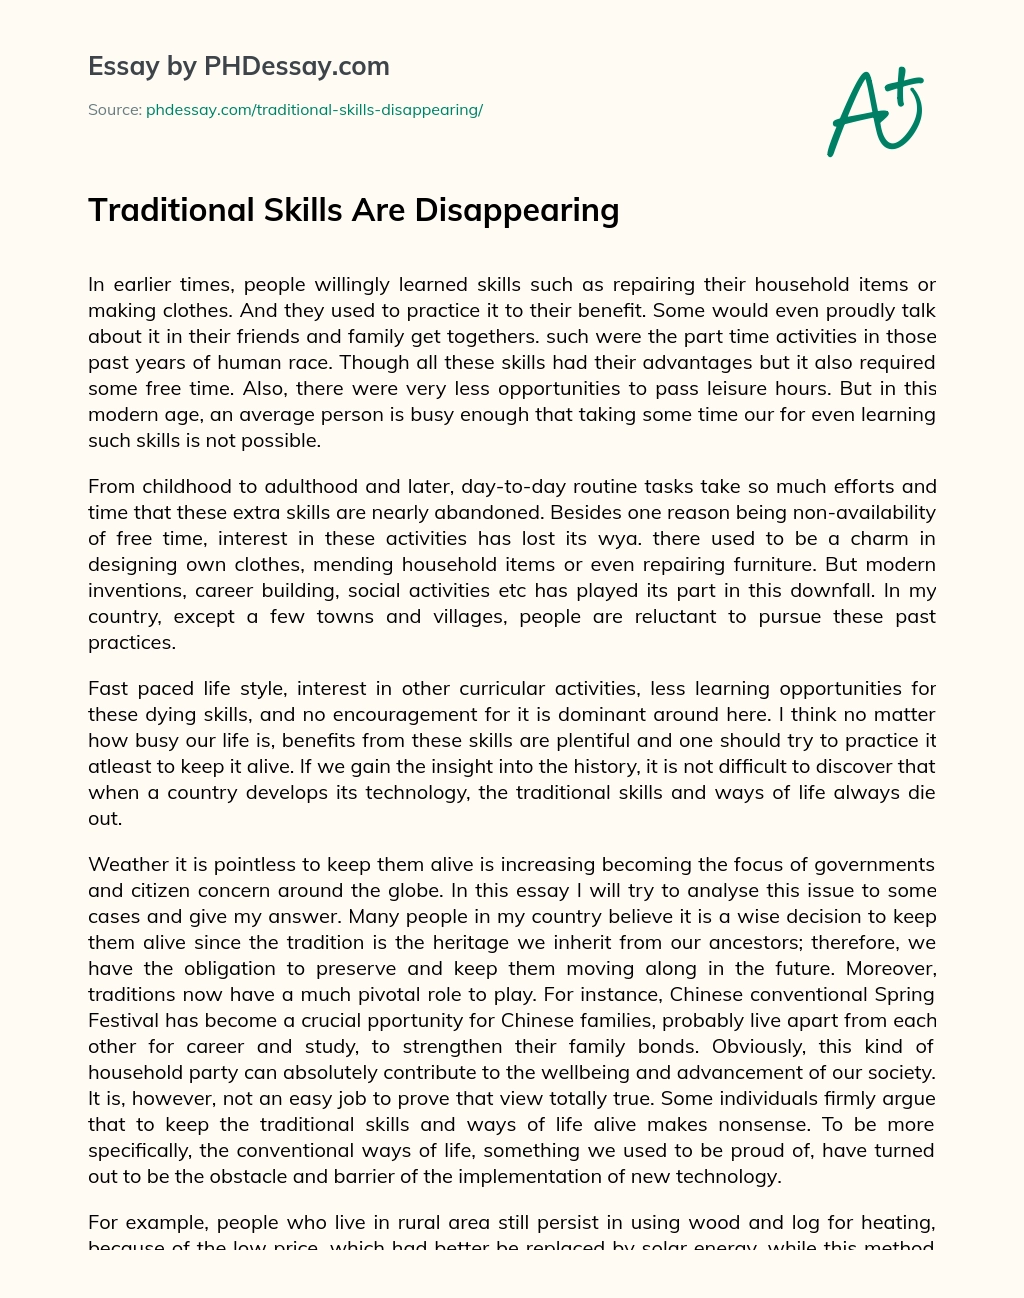 Traditional Skills Are Disappearing essay